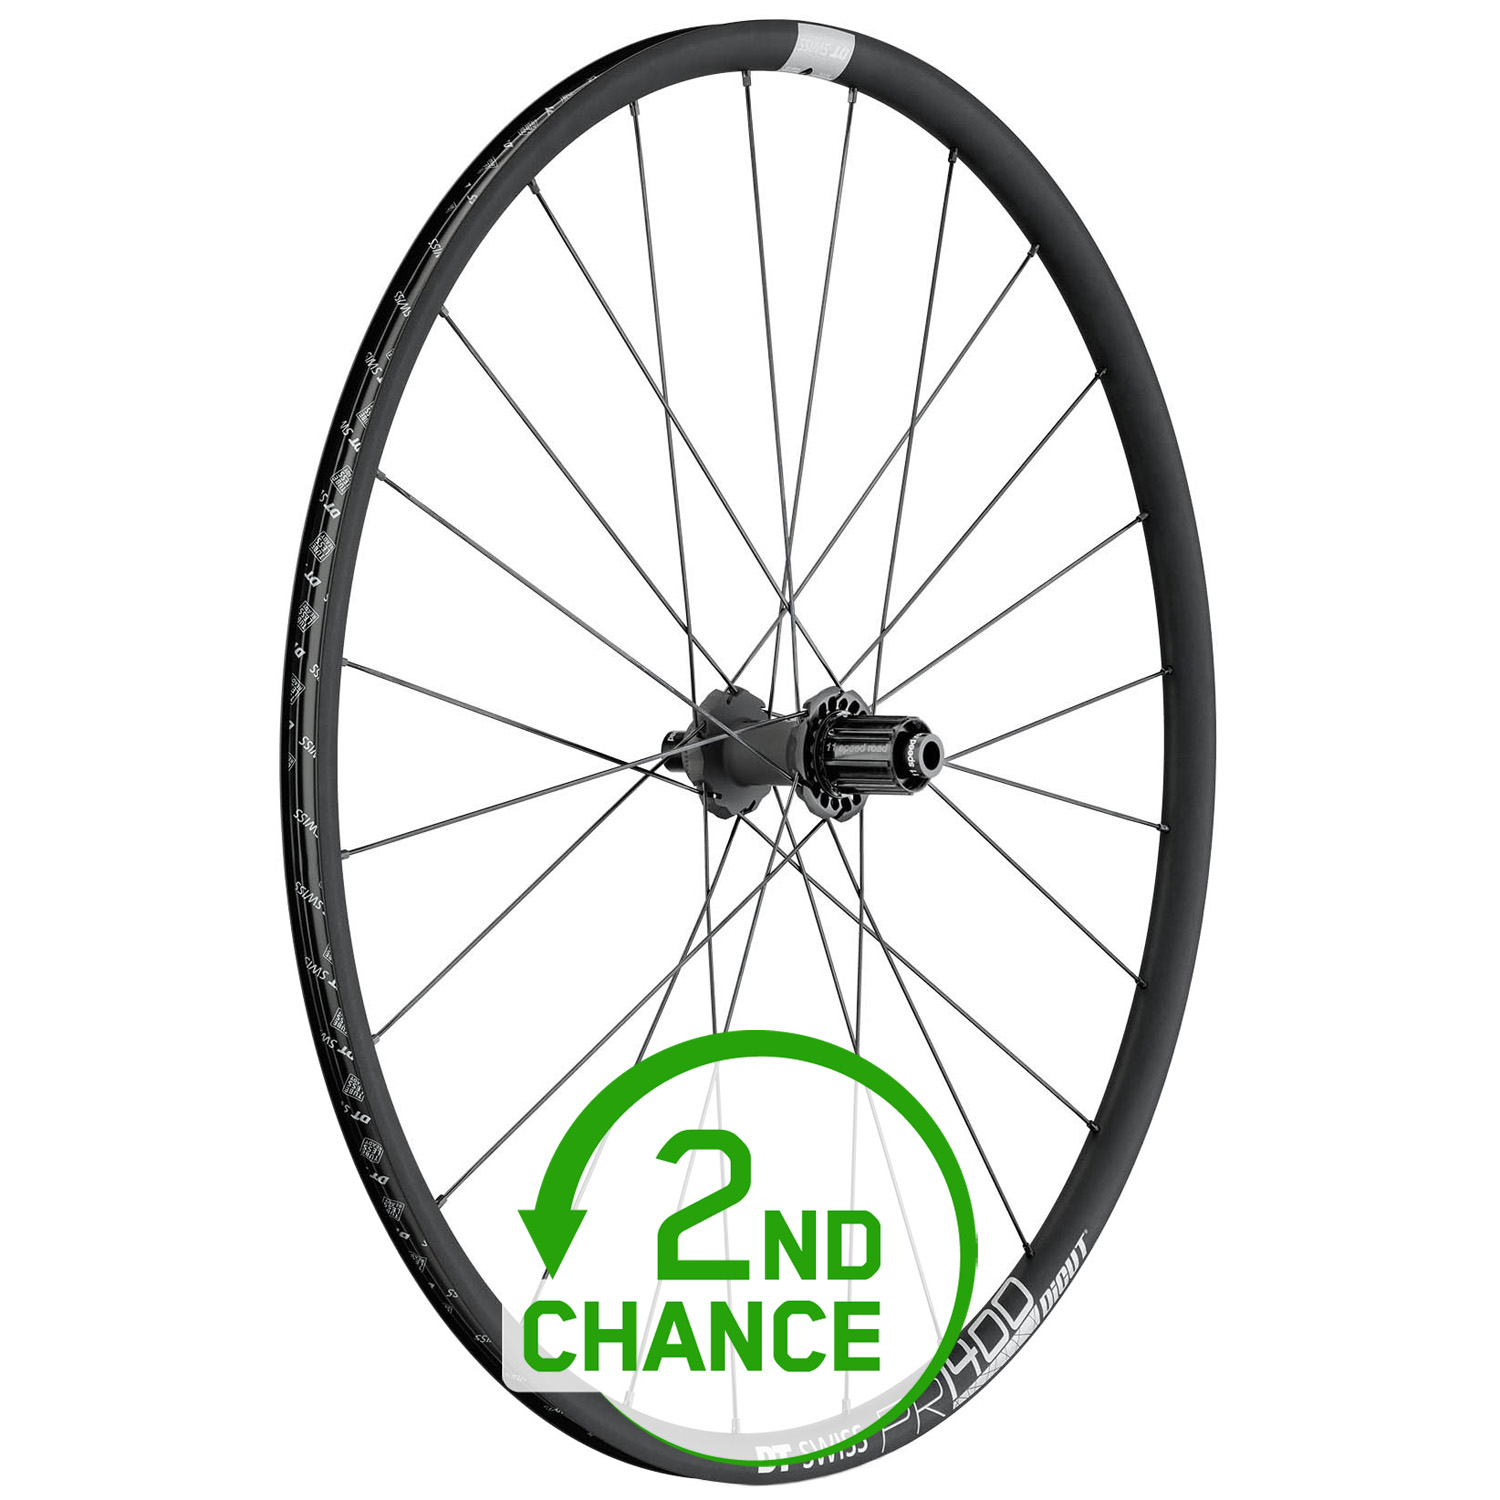 Picture of DT Swiss PR 1400 DICUT db 21 - Rear Wheel | Clincher | Centerlock - 12x142mm - without Tubless valve - 2nd Choice